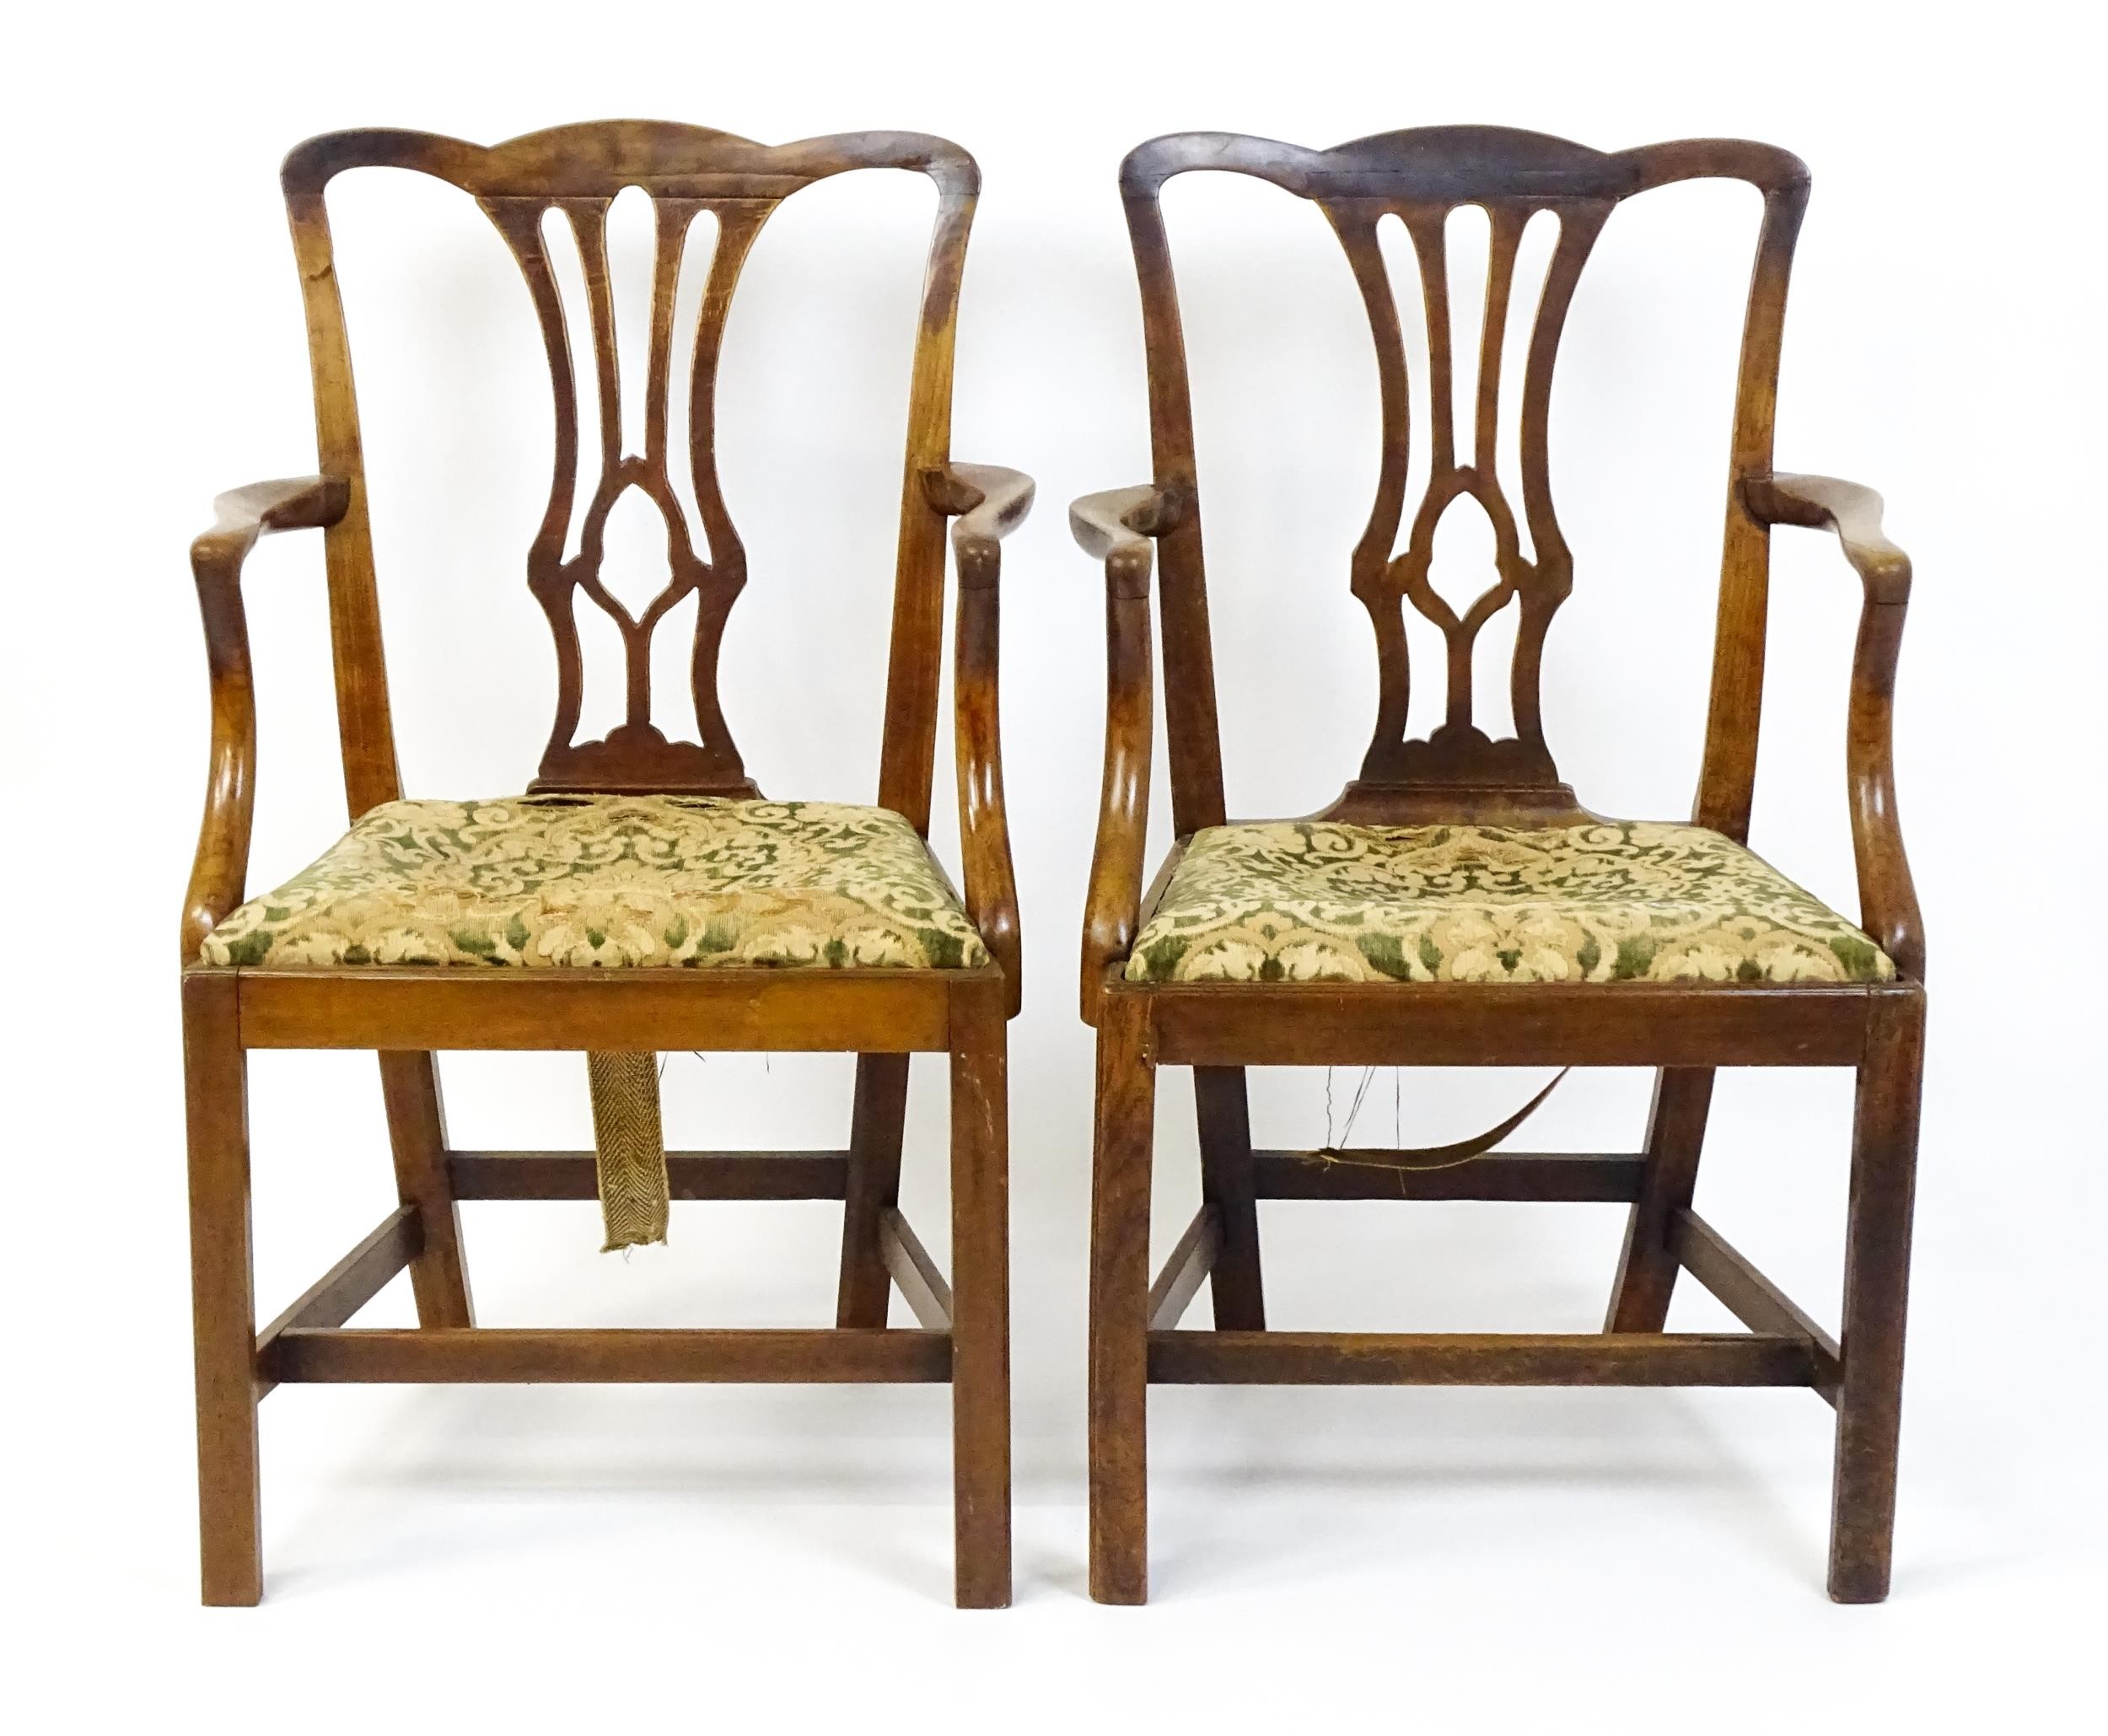 A pair of late 18thC fruitwood elbow chairs with Chippendale back splats, swept arms, drop in - Image 4 of 6